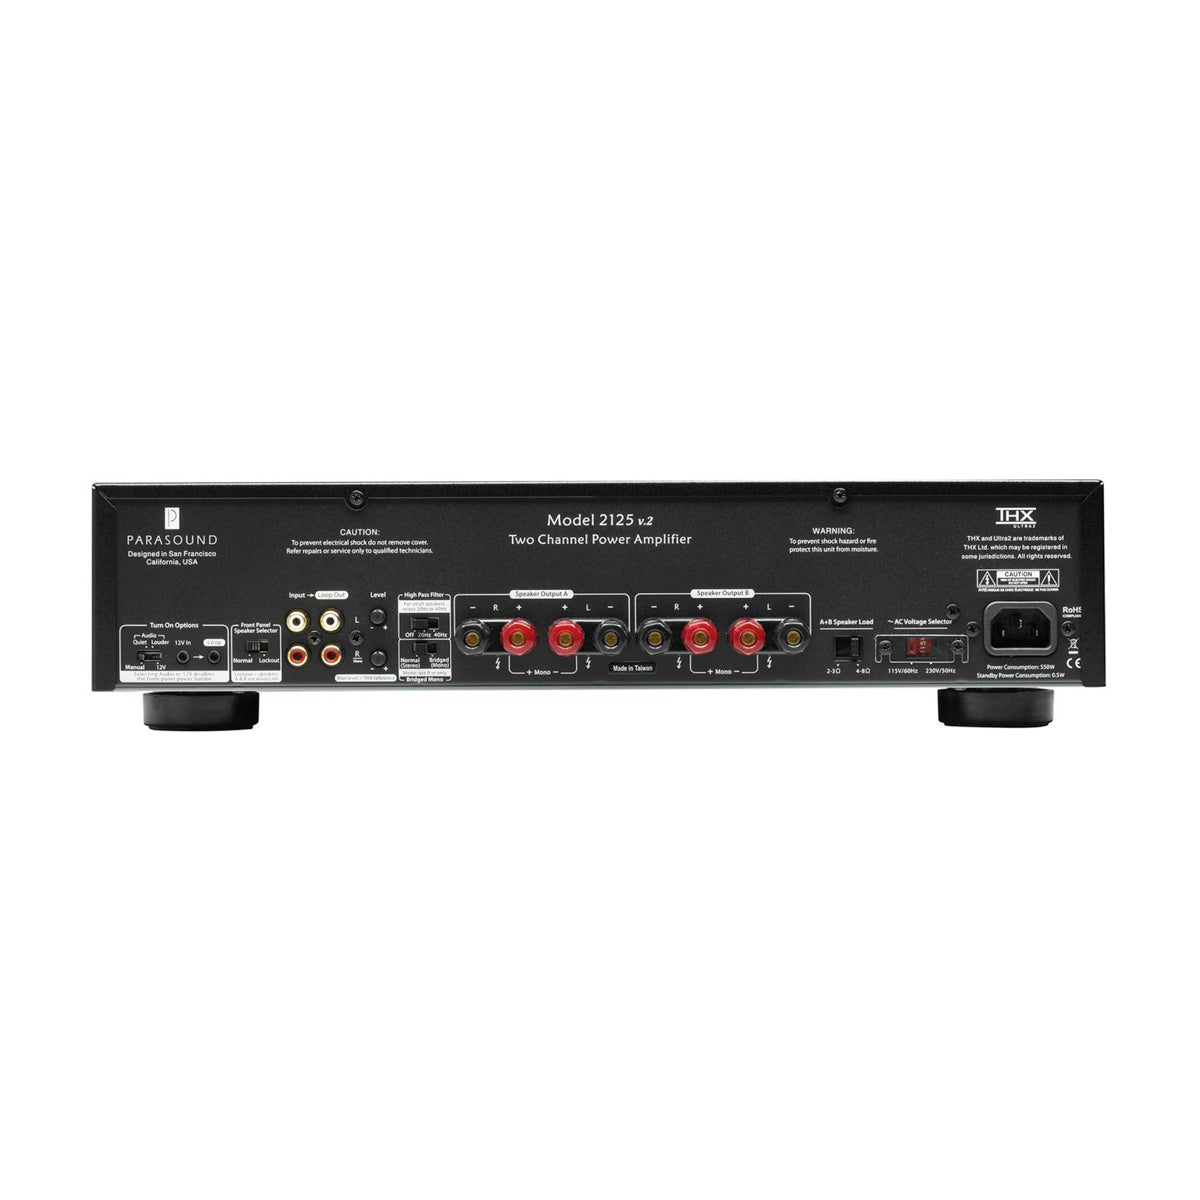 Parasound CLASSIC 2125 v.2 2-Channel Power Amplifier - The Audio Experts